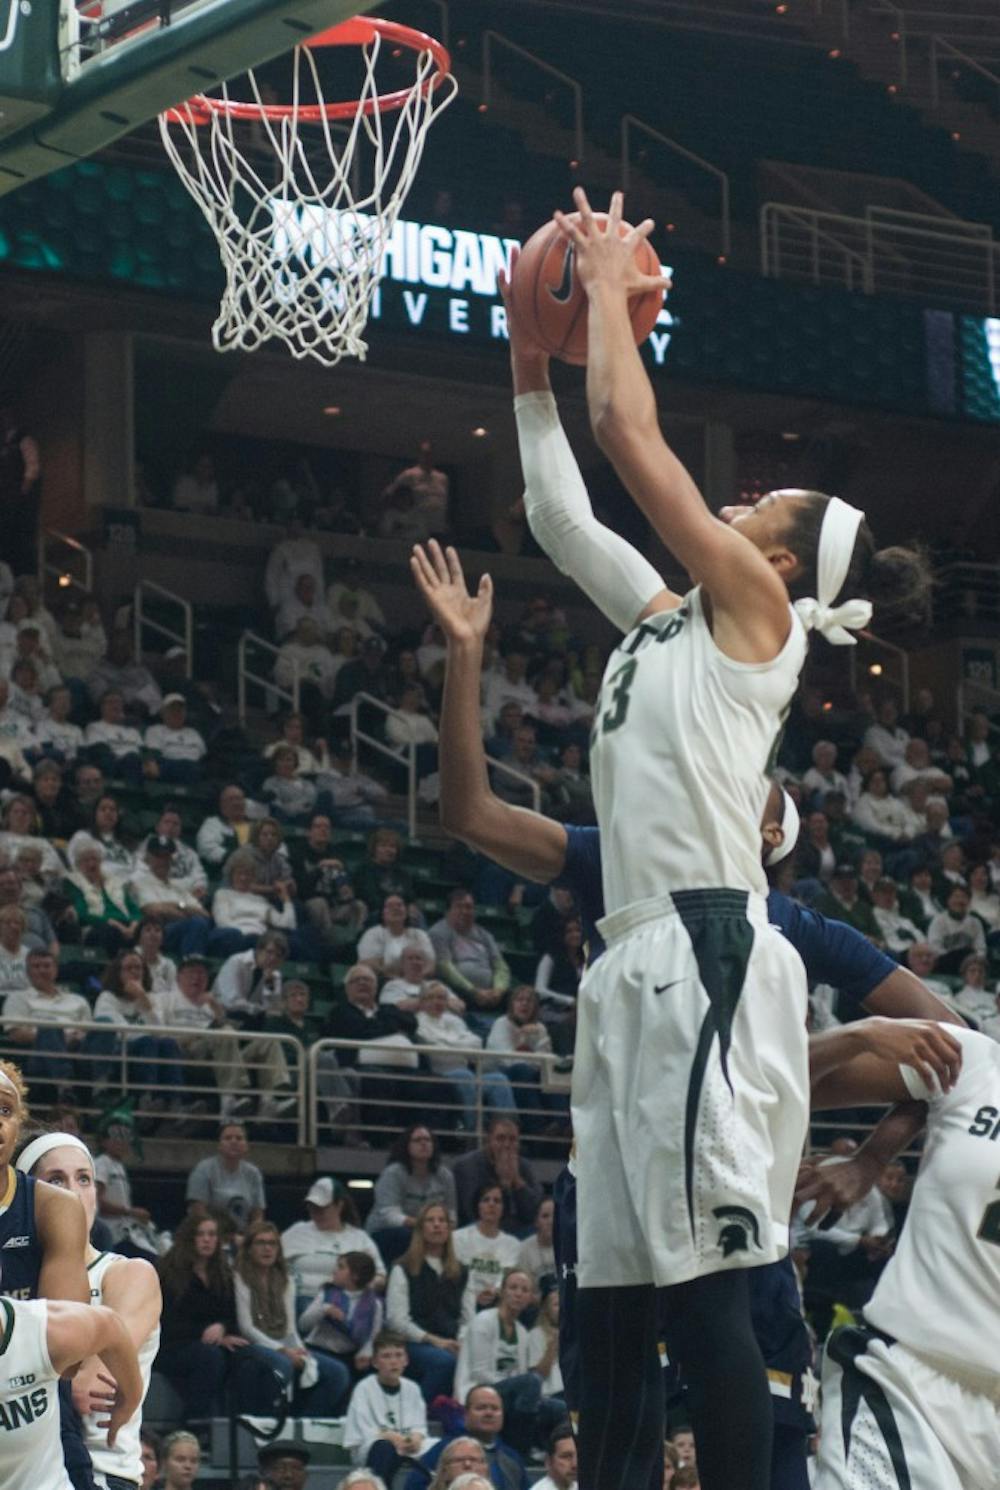 <p>Redshirted sophomore forward Aerial Powers goes up for a rebound during the game against Notre Dame on Nov. 19, 2014, at Breslin Center. The Fighting Irish defeated the Spartans, 71-63. Aerika Williams/The State News.</p>